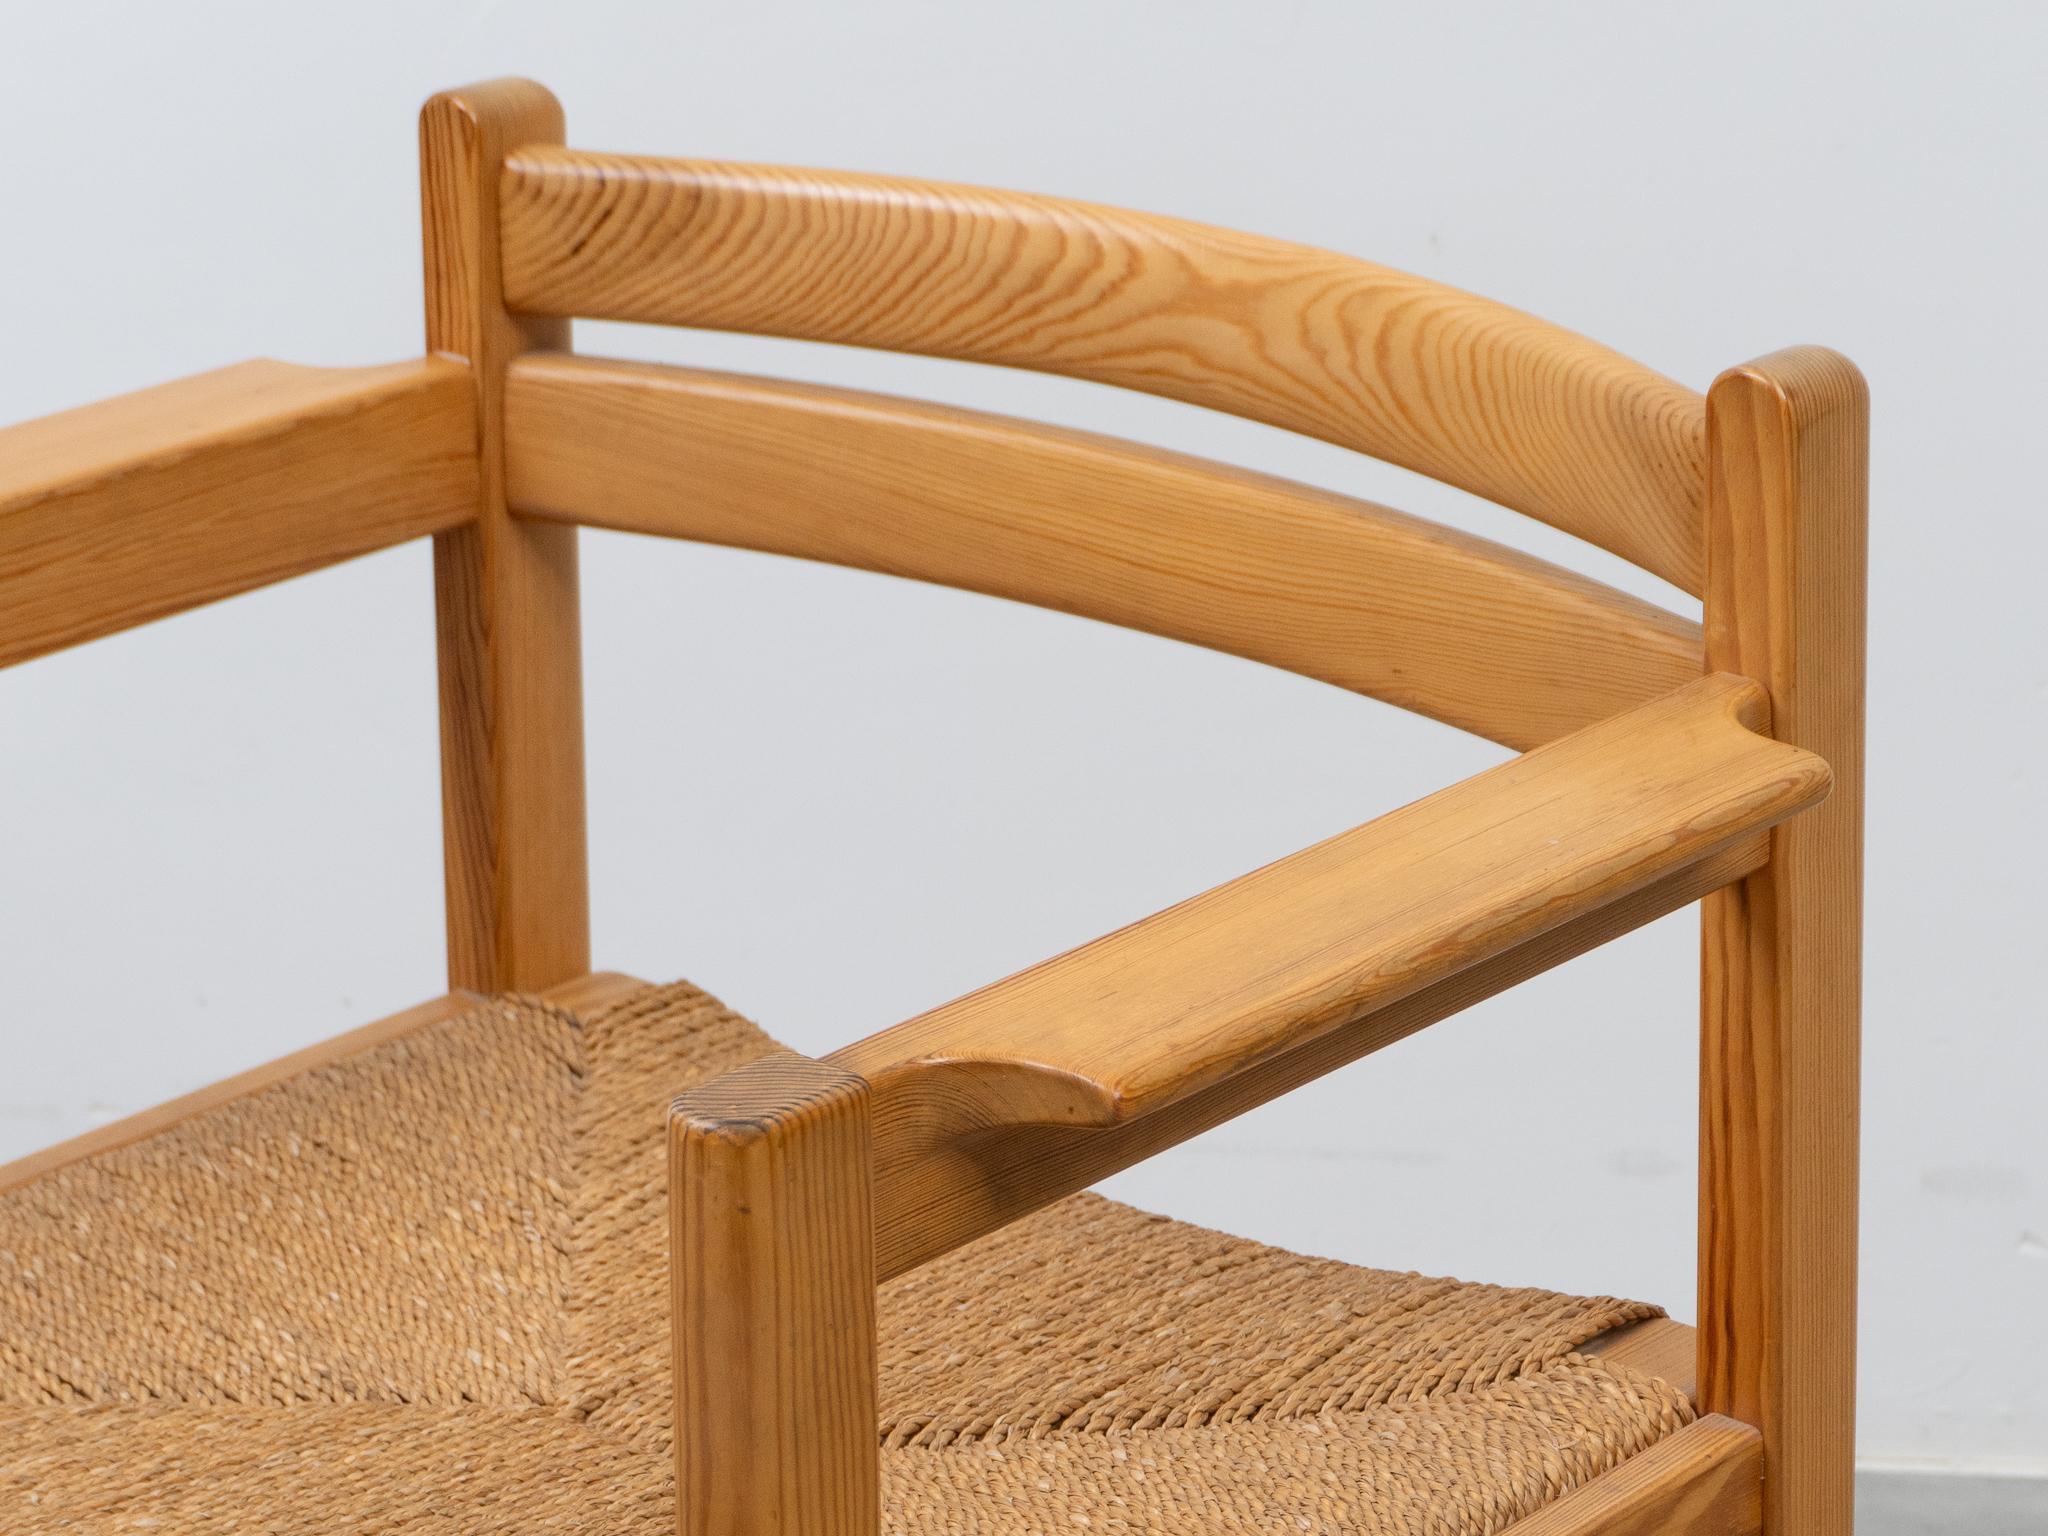 Eight Pine Arm Chairs by Børge Mogensen for AB Karl Andersson & Söner Sweden For Sale 1